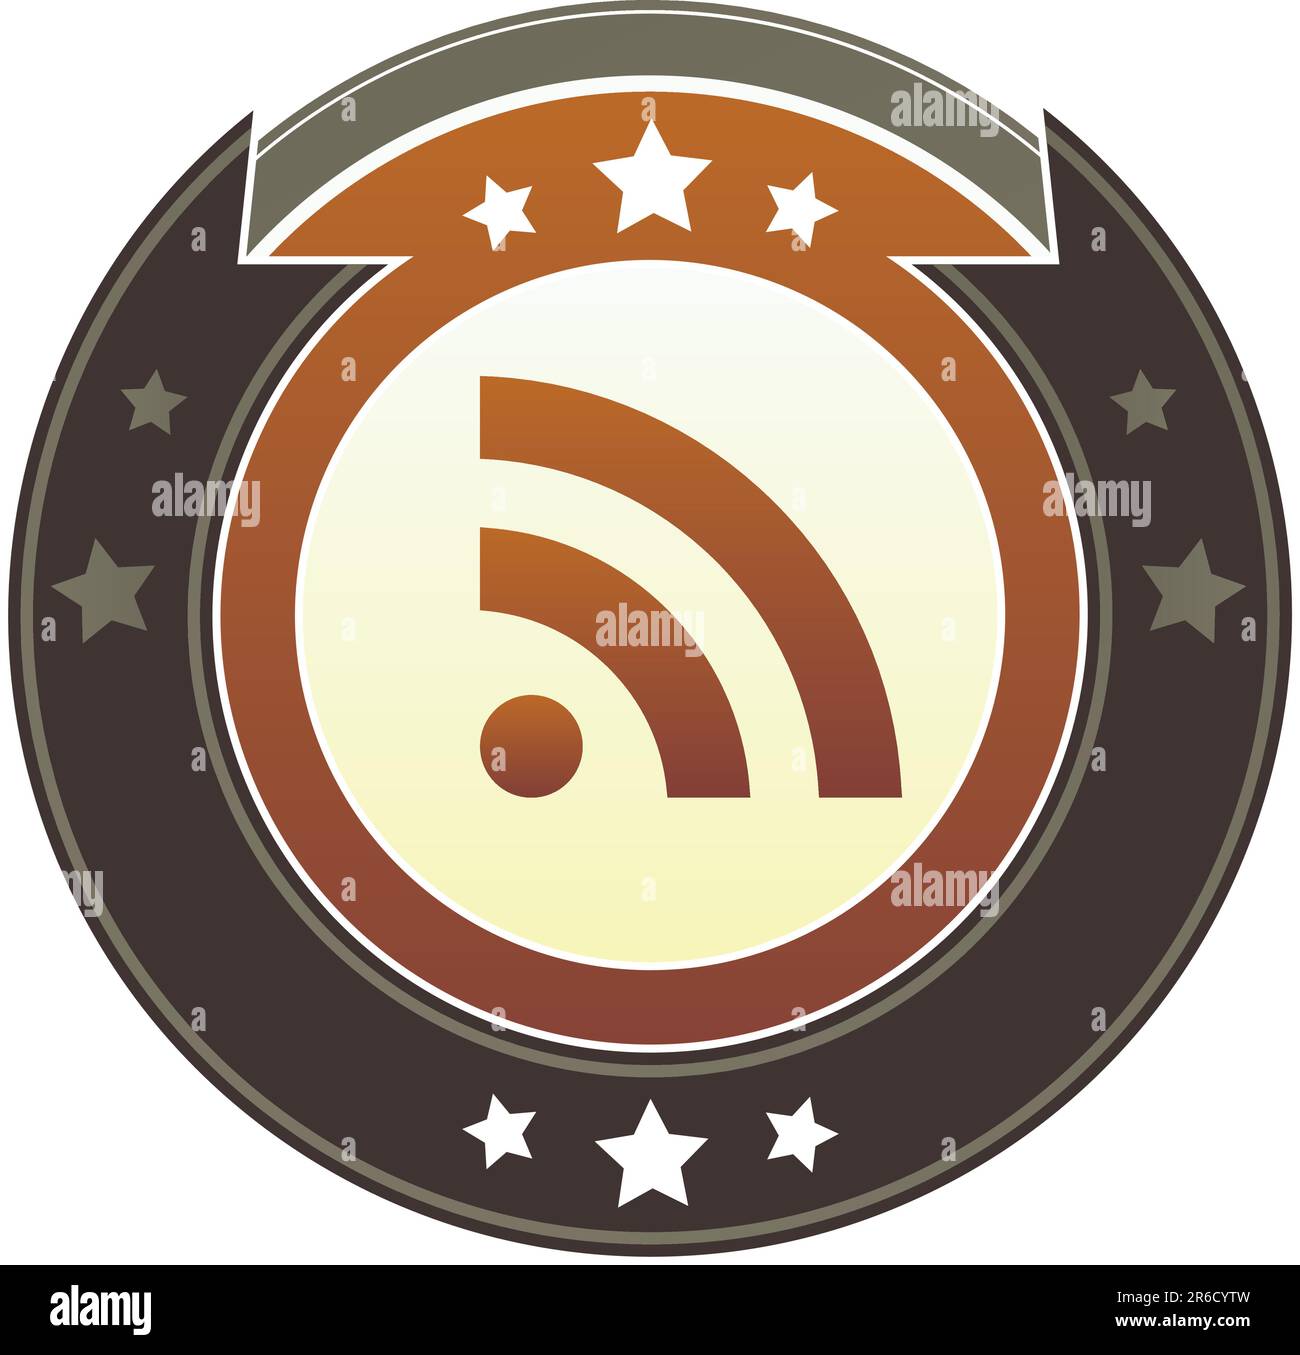 RSS feed icon on round red and brown imperial vector button with star accents suitable for use on website, in print and promotional materials, and ... Stock Vector